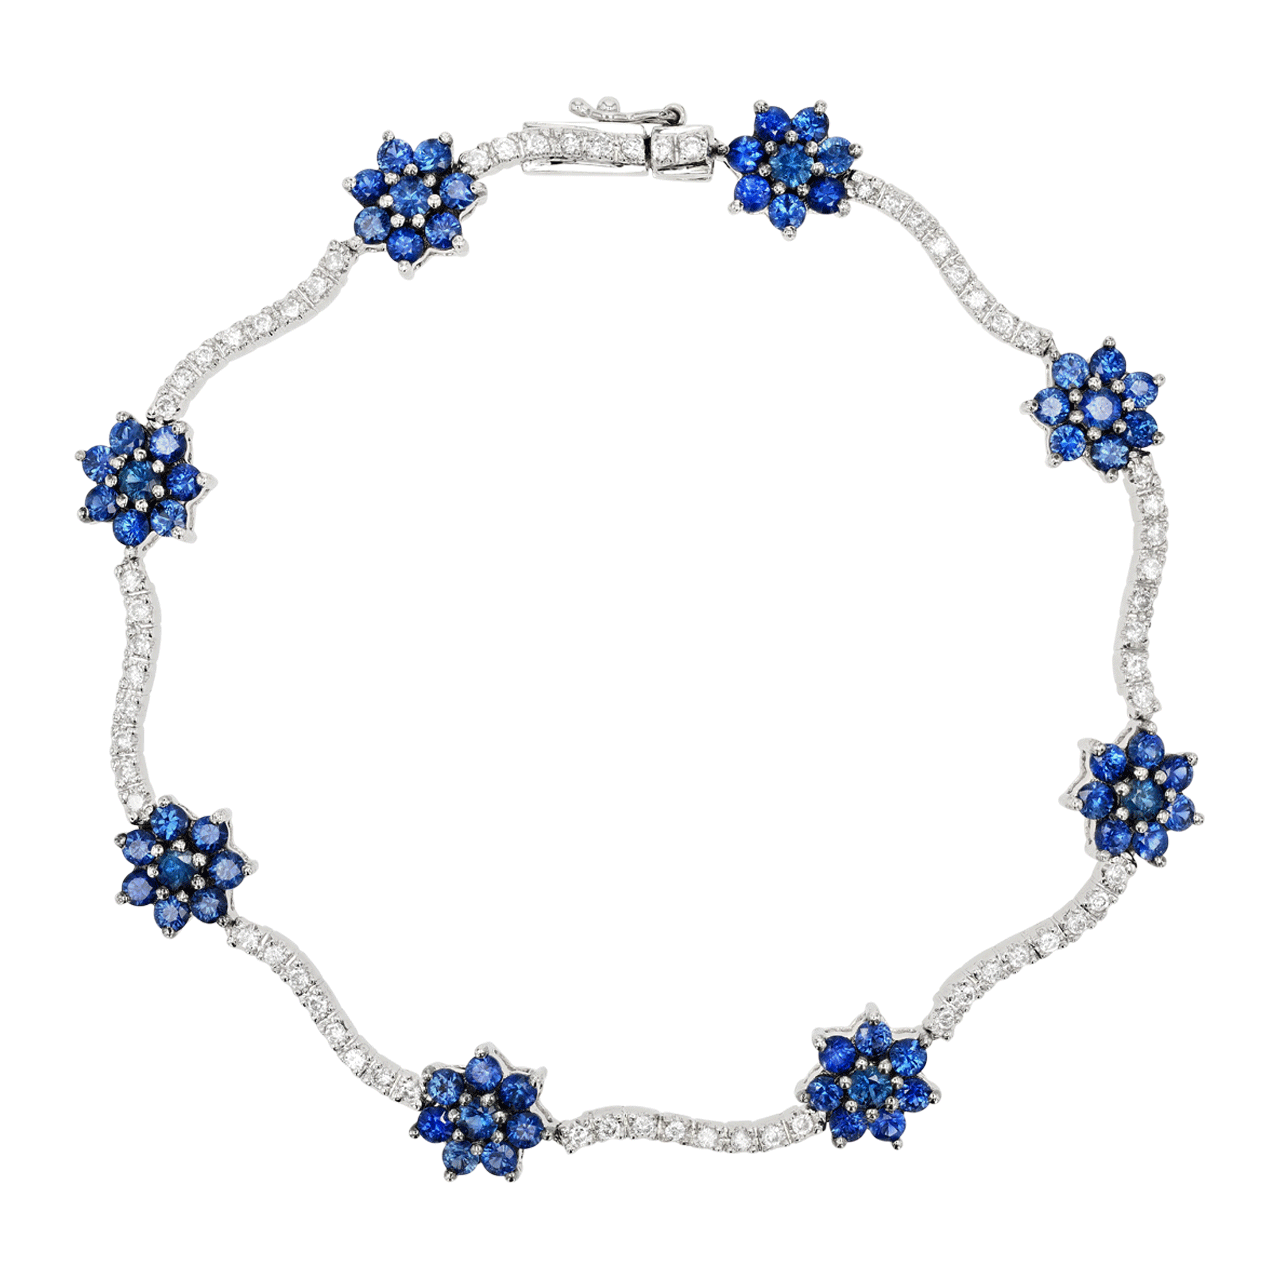 Vintage 18W diamond and blue sapphire bracelet with sapphires set in circular flower pattern